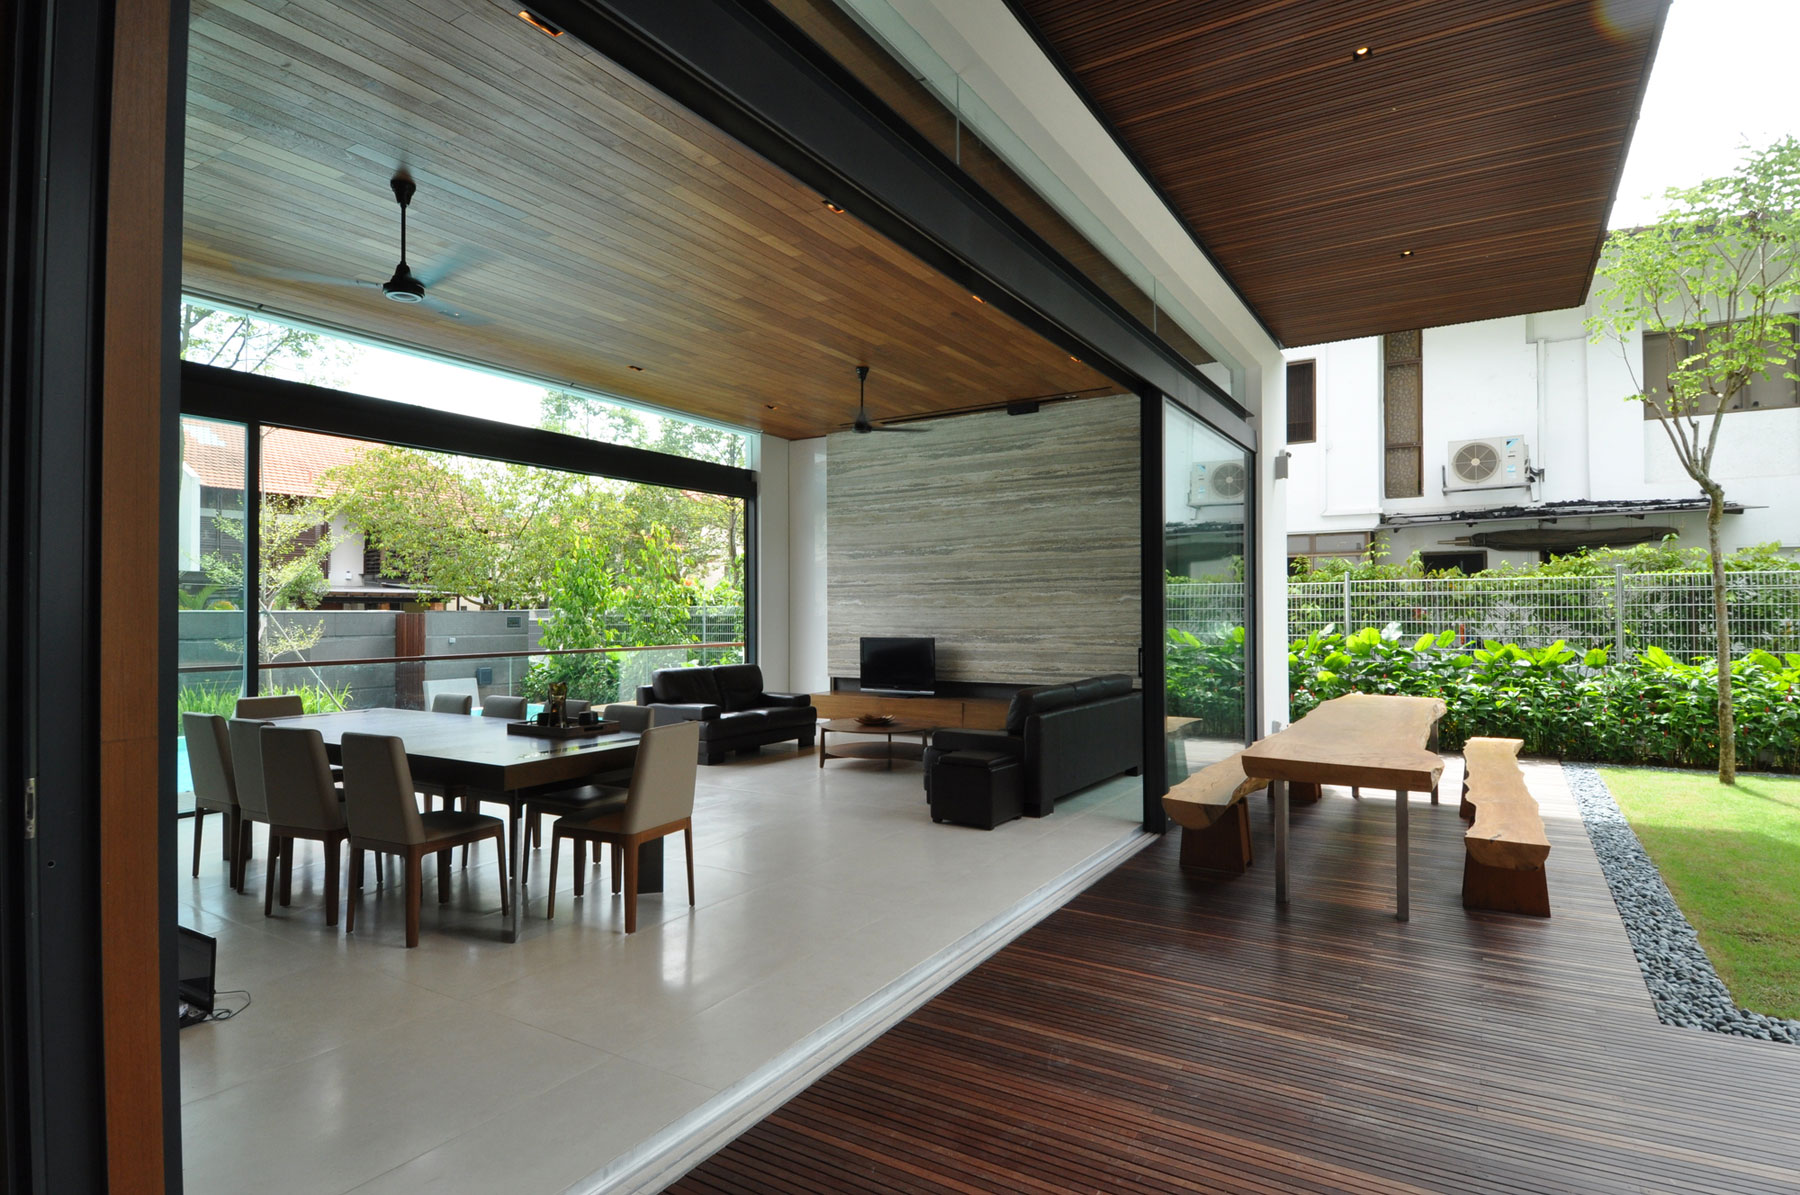 terrace singapore sunset bungalow collective modern open contemporary living space wall ceiling interior landscape archdaily floor wooden residence architecture stylish